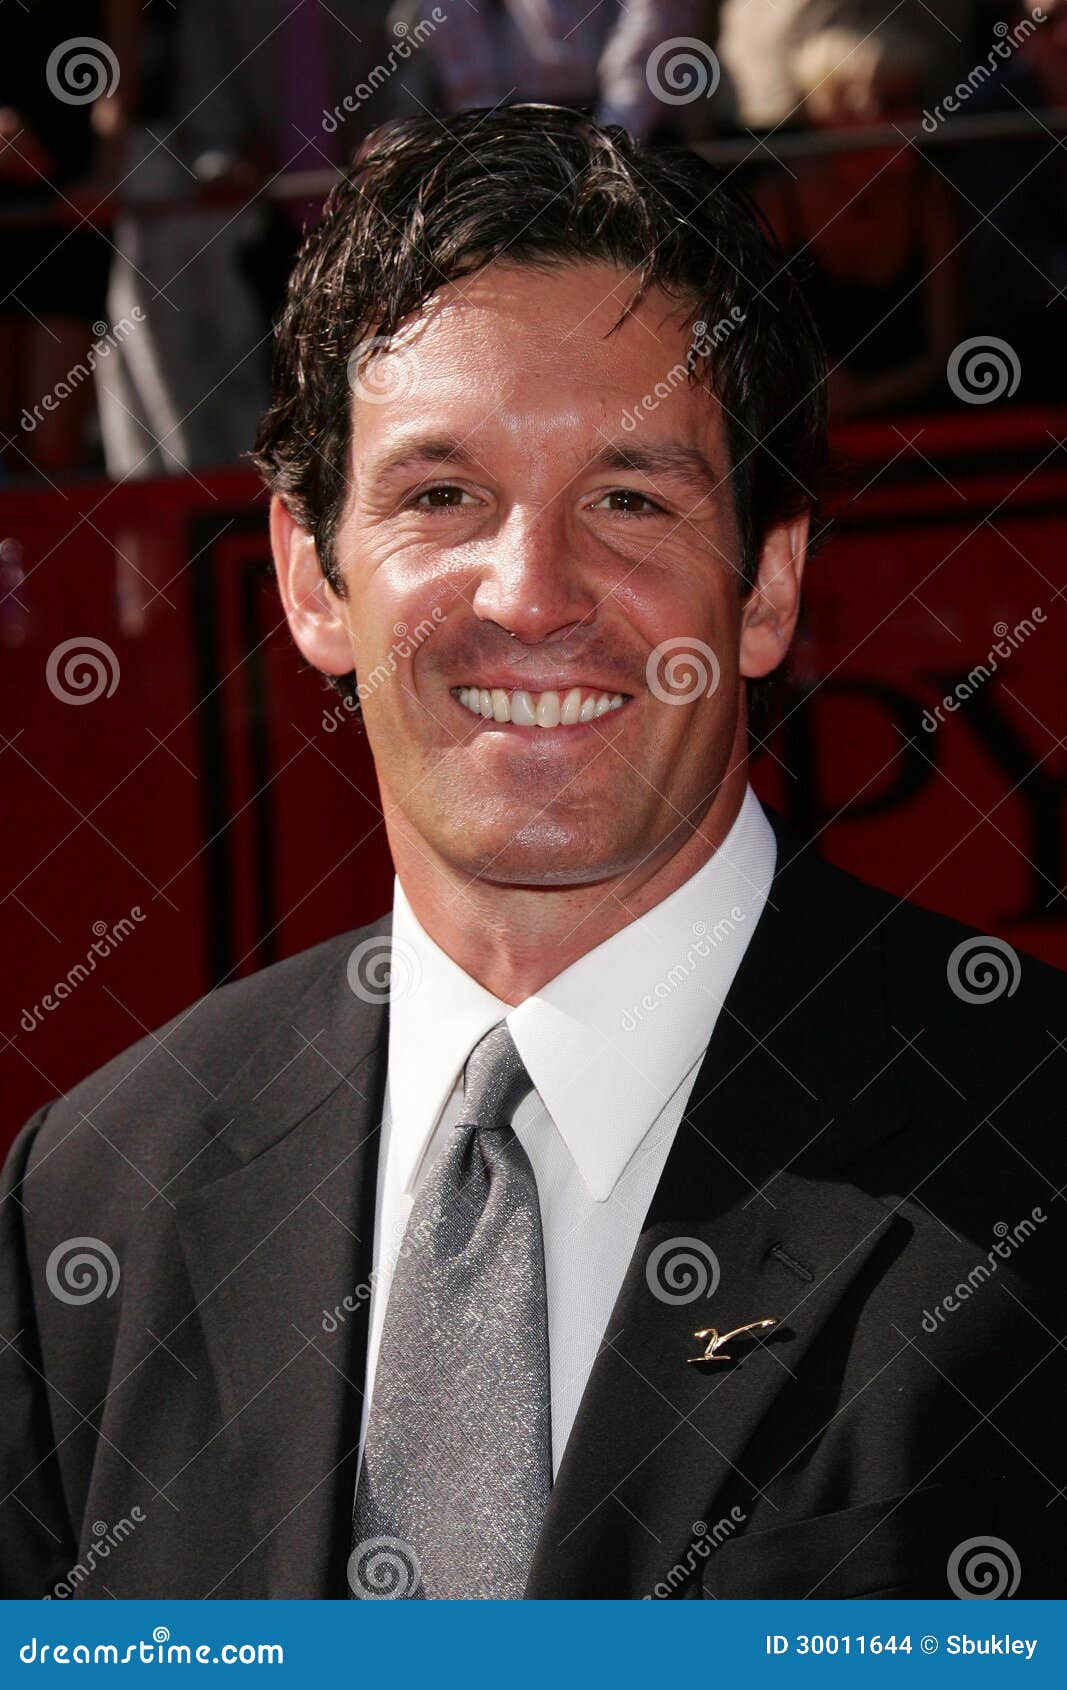 Photos and Pictures - Brendan Shanahan at the 13th Annual ESPY Awards -  Arrivals, Kodak Theatre, Hollywood, CA 07-13-05